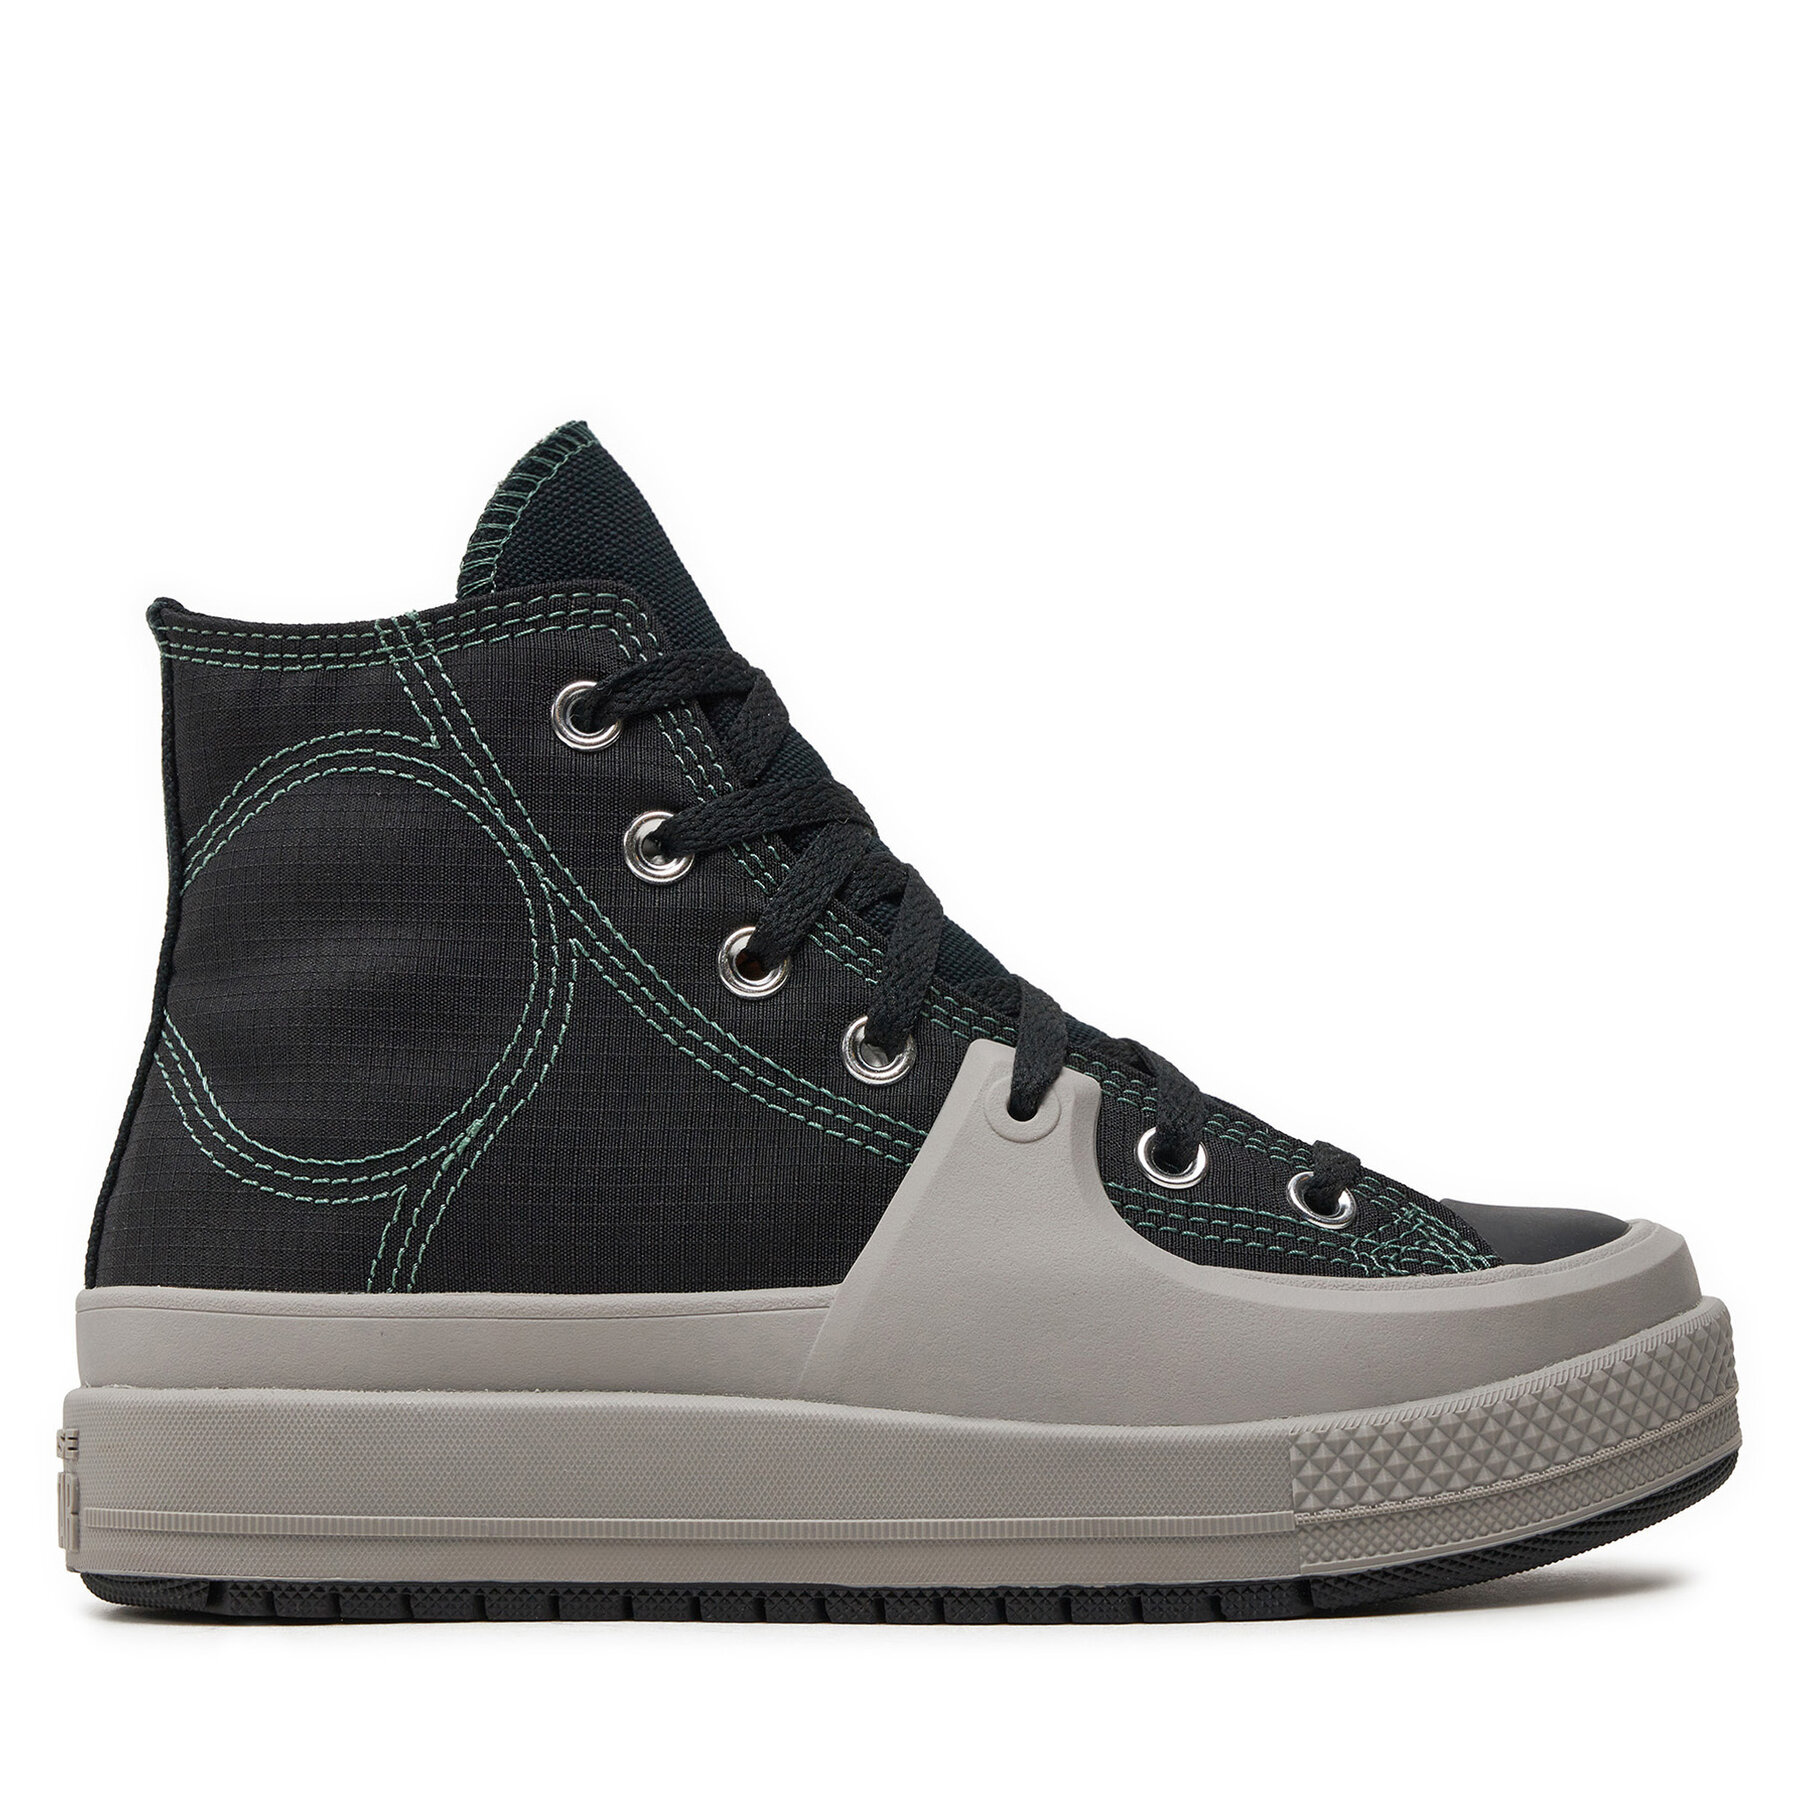 Sneakers aus Stoff Converse Chuck Taylor All Star Construct A06617C Black/Totally Neutral von Converse